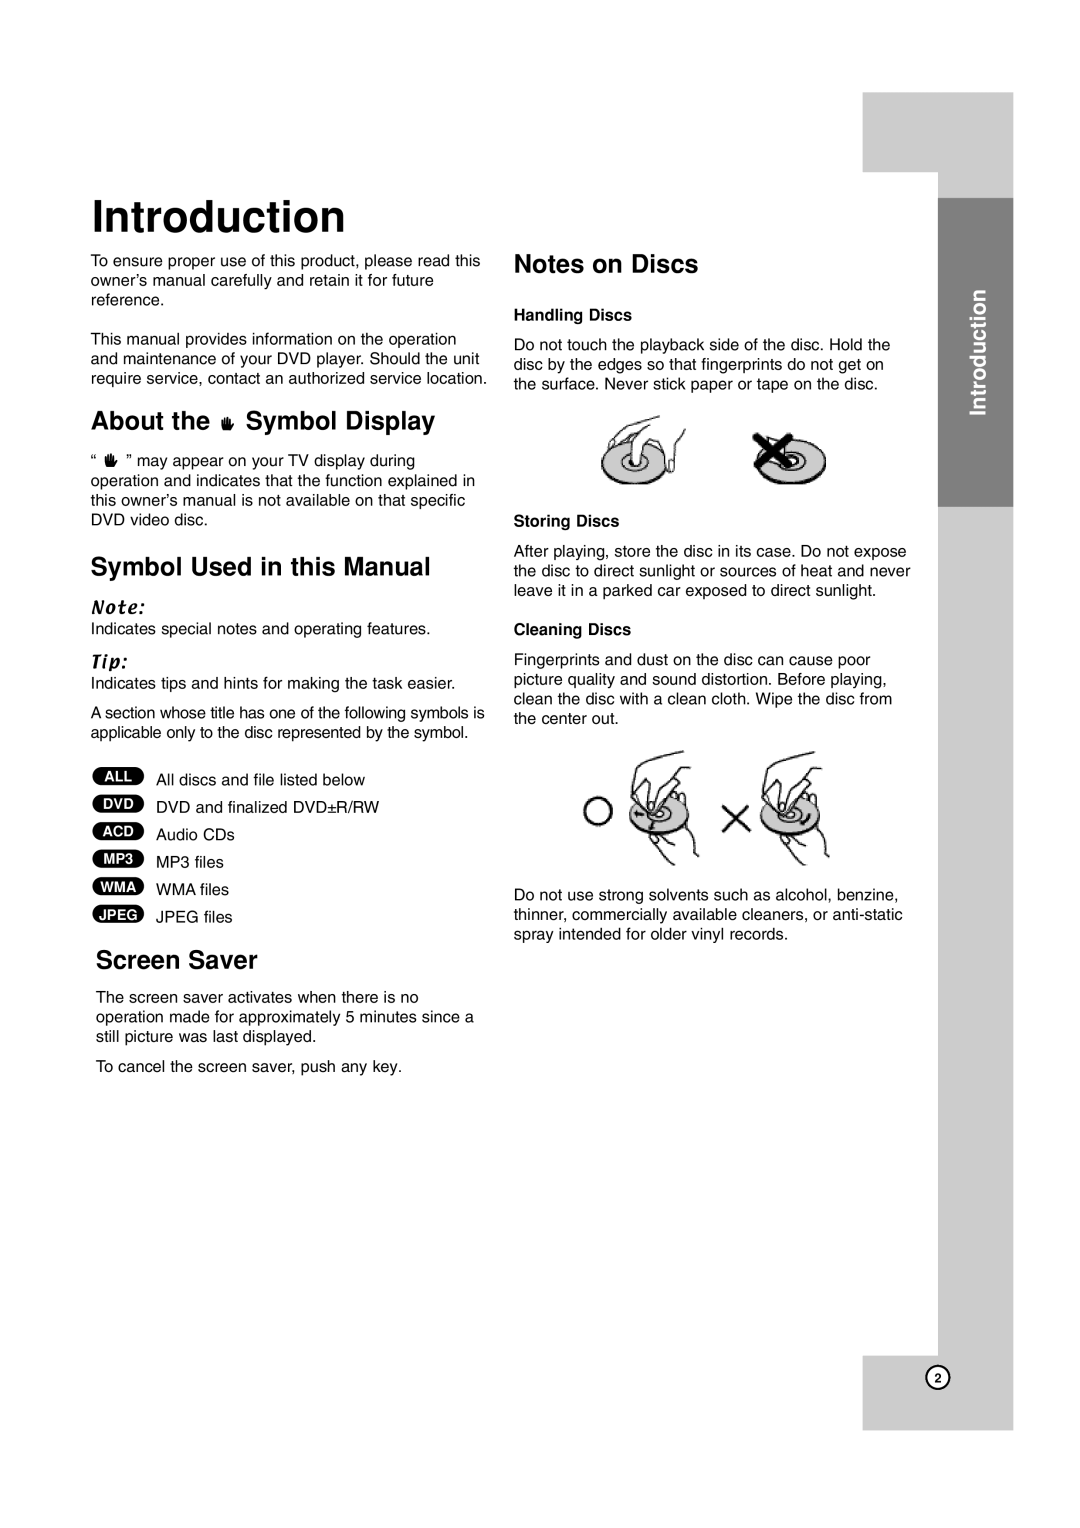 JVC TH-G40 manual Introduction, About the Symbol Display, Symbol Used in this Manual, Screen Saver, Notes on Discs, T i p 